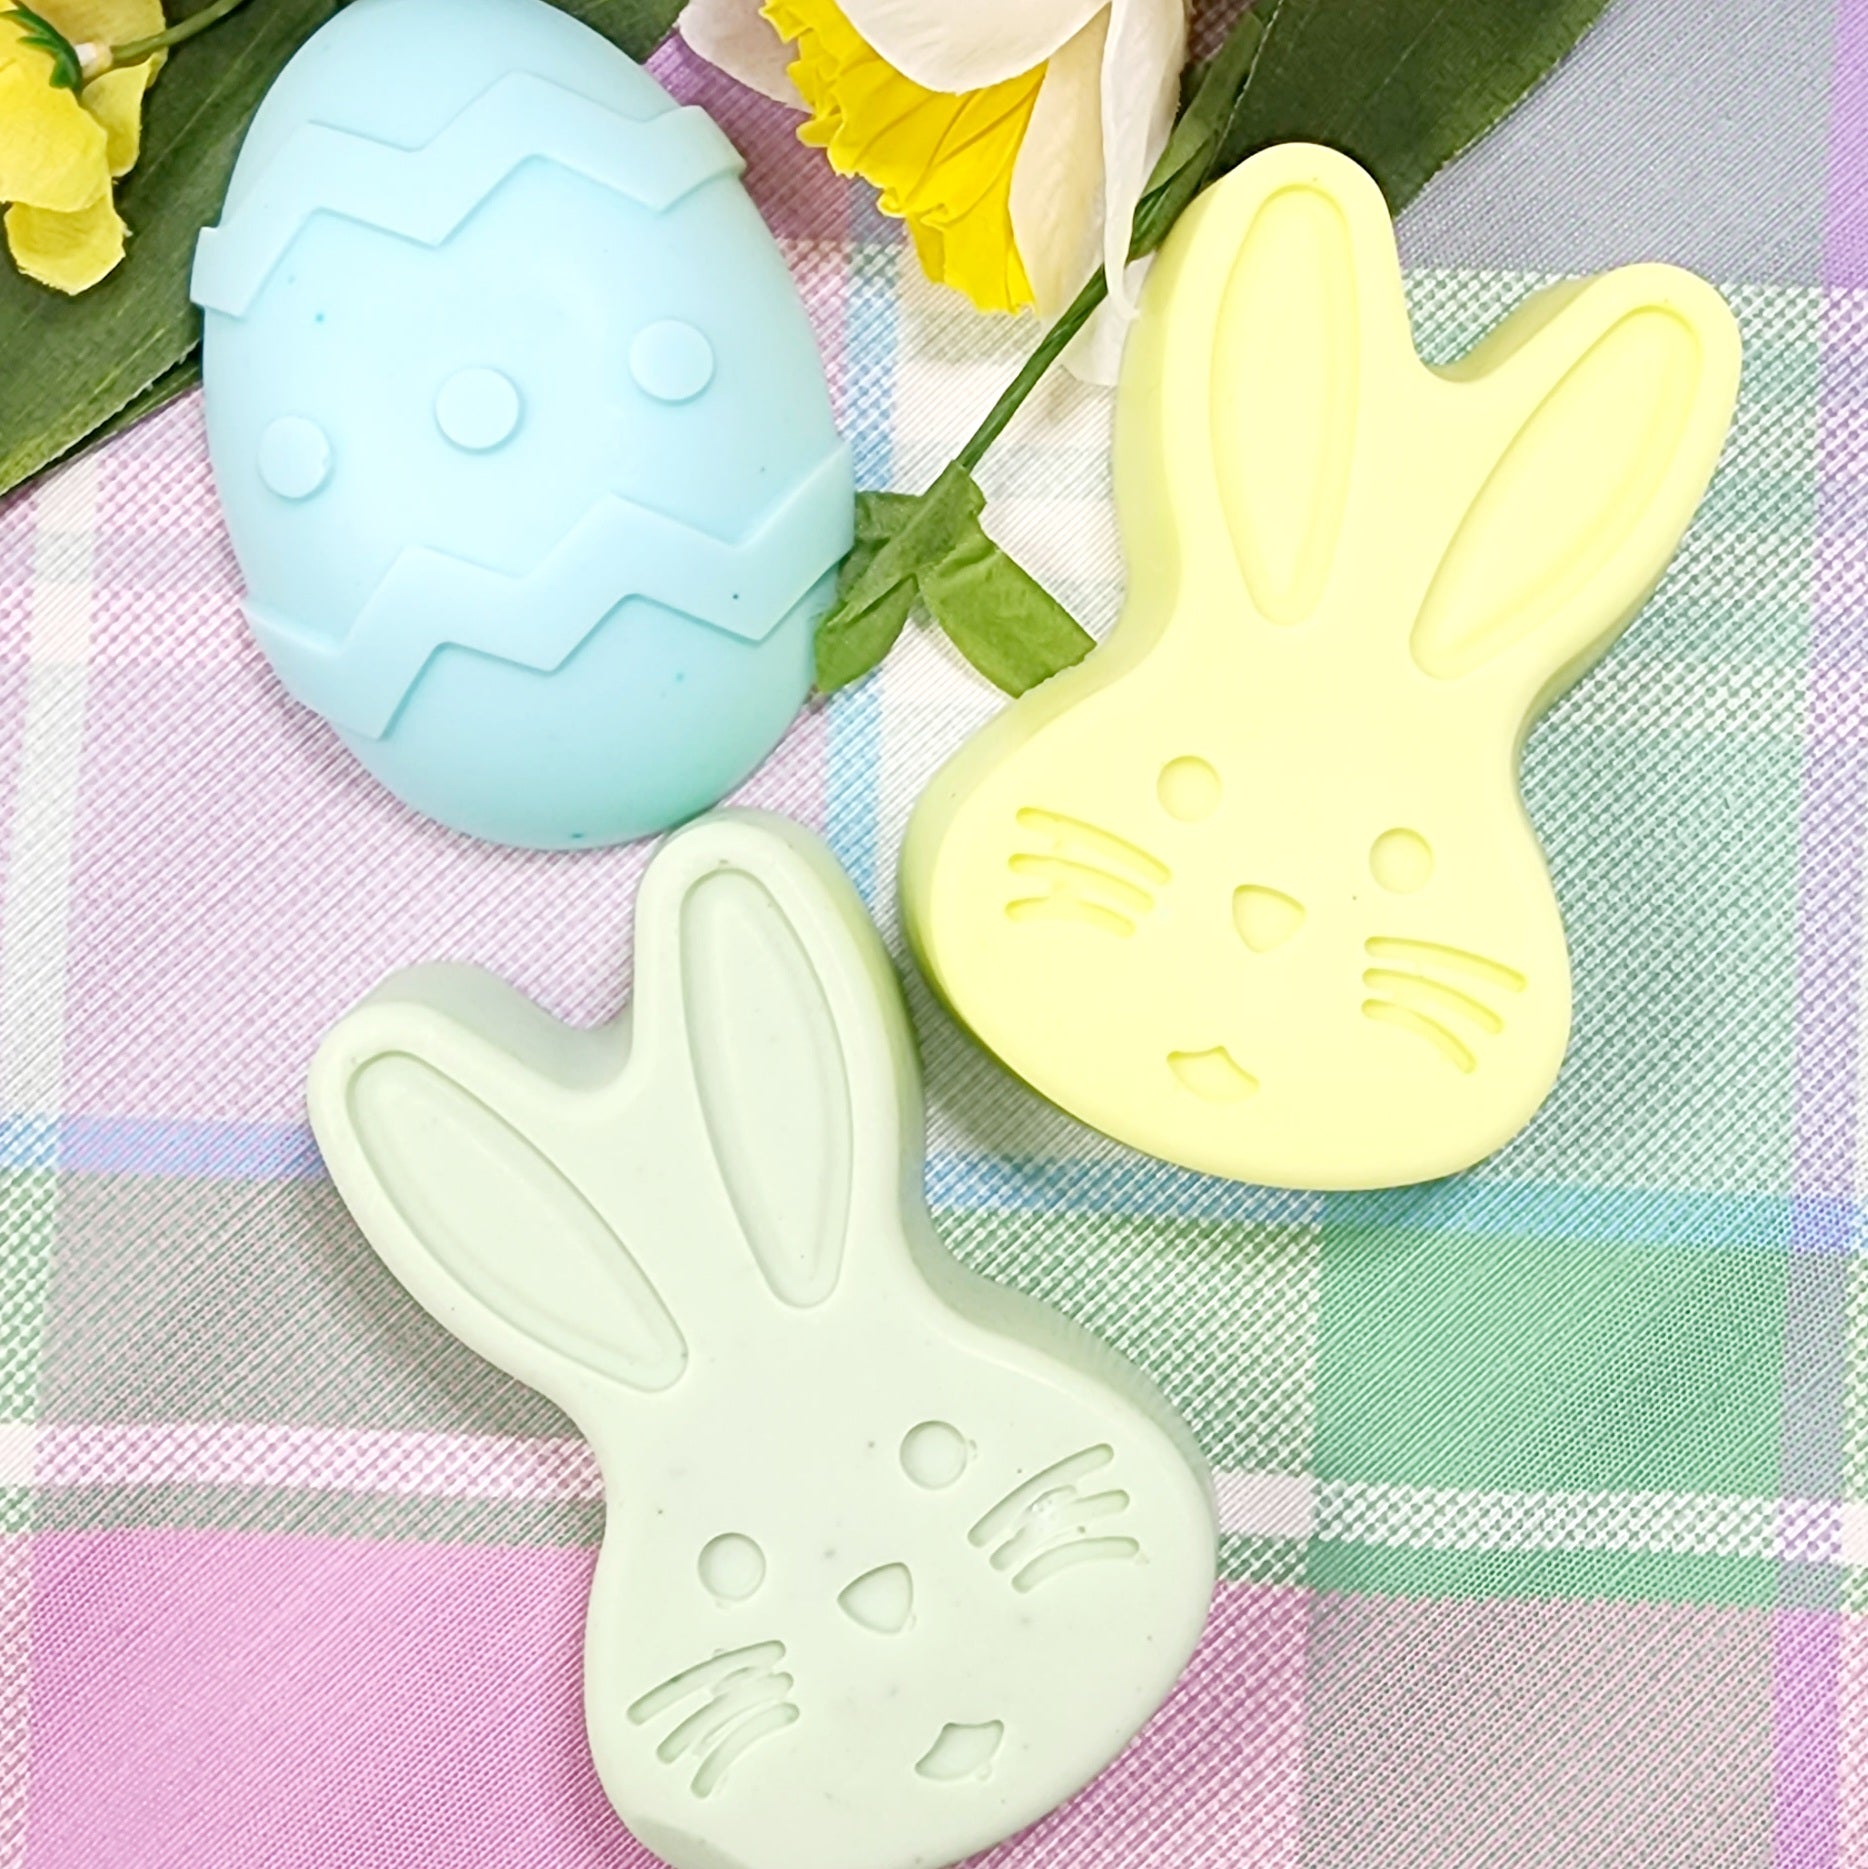 Large Bunny and Easter Egg Soap Diana's Candles and Soaps 